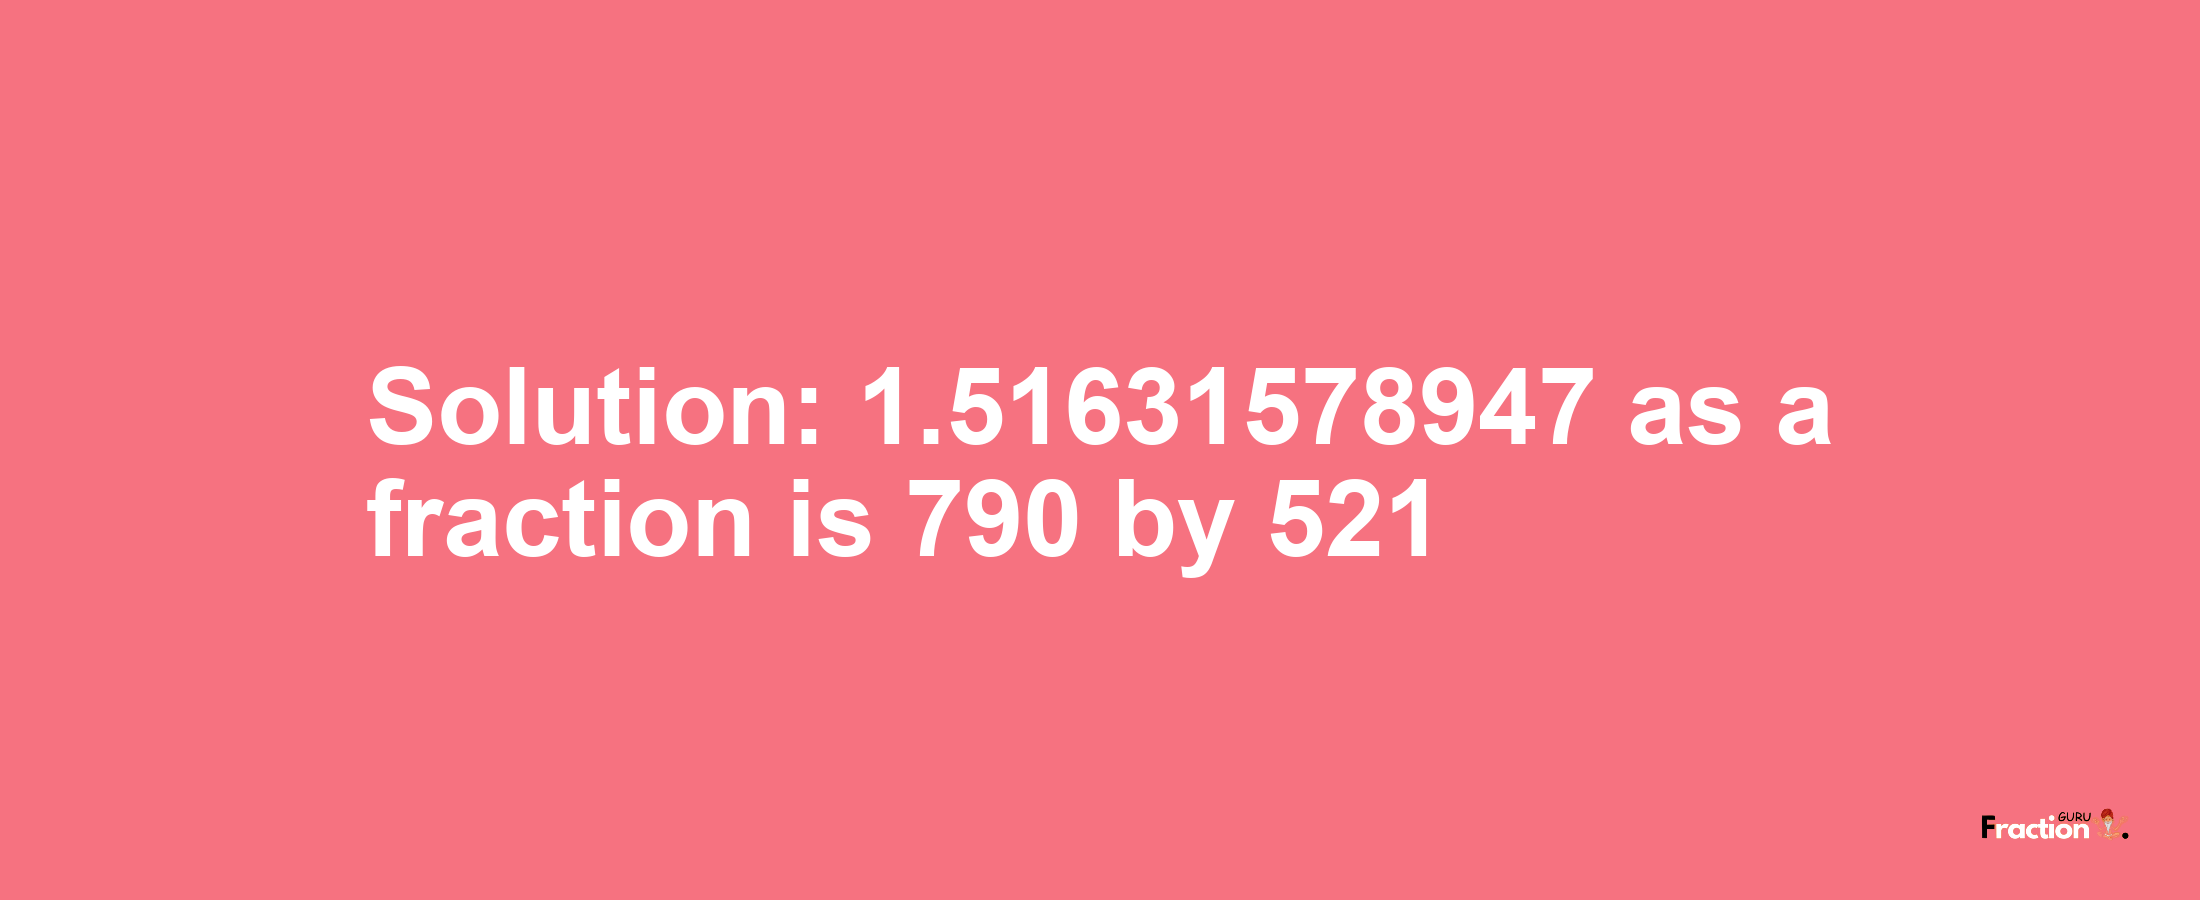 Solution:1.51631578947 as a fraction is 790/521